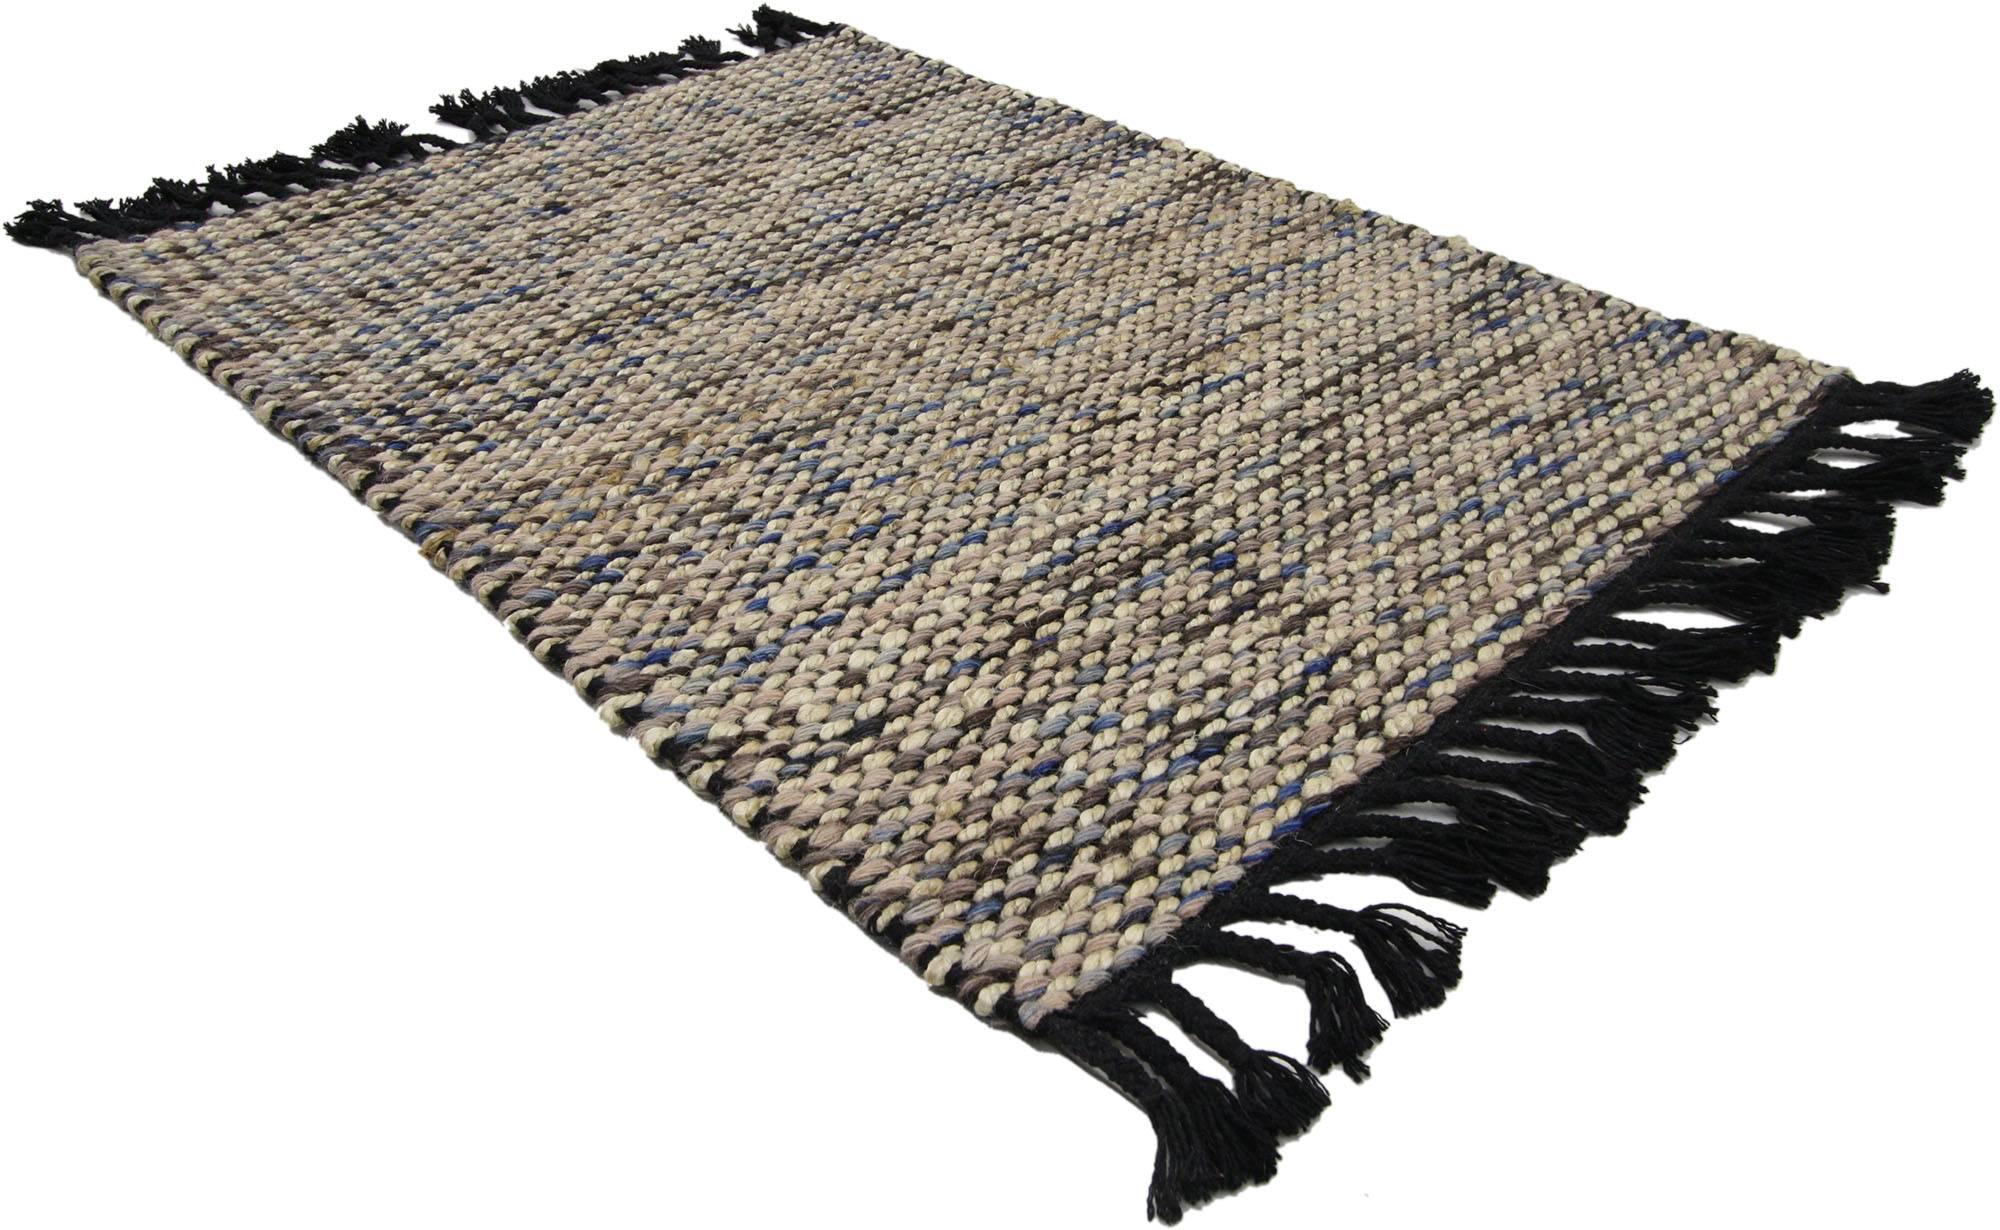 30381 new Dhurrie flat-weave Kilim rug with modern Lake House style, Custom area rug. Freshen up your space and inject color without going polychrome crazy with this transitional grasscloth pattern area rug. Subtle in style and very versatile, this